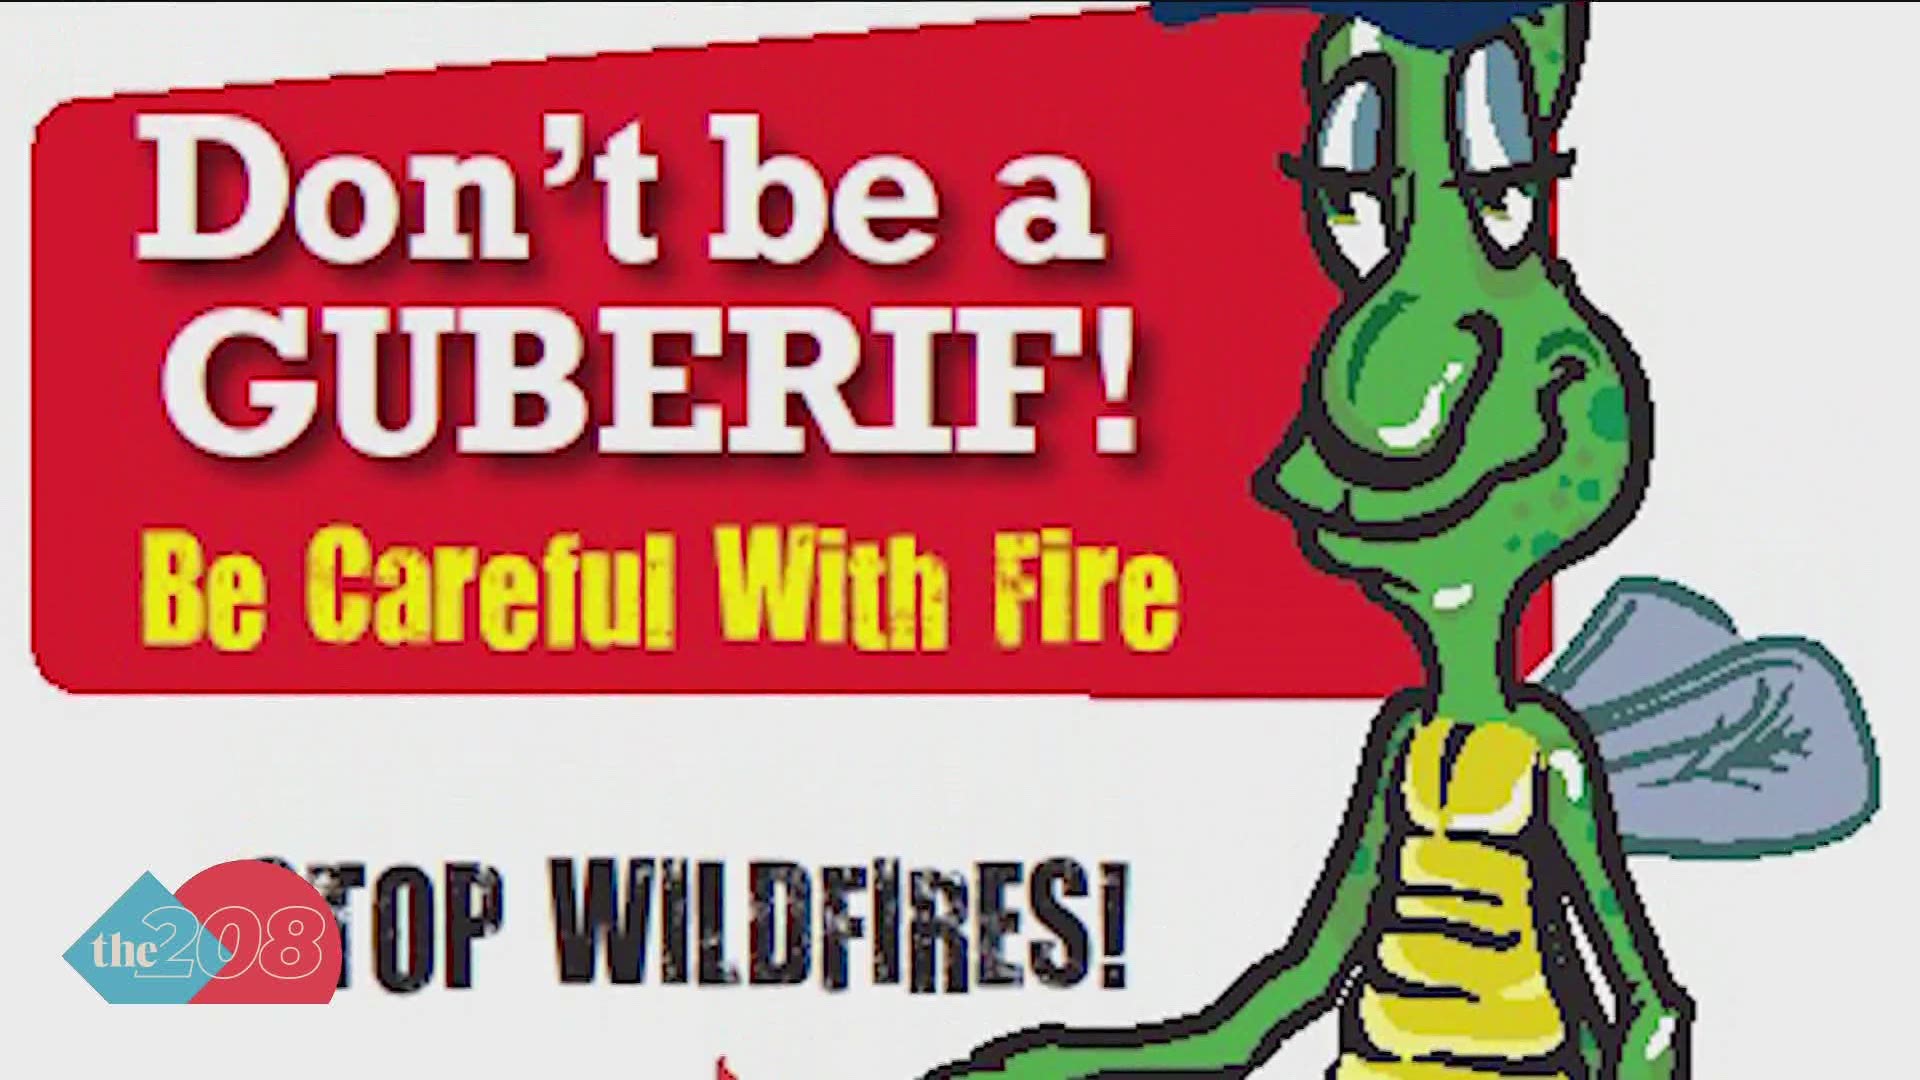 Guberif is firebug spelled backwards. It is a character from a 1950s campaign to keep Idaho's forests green.